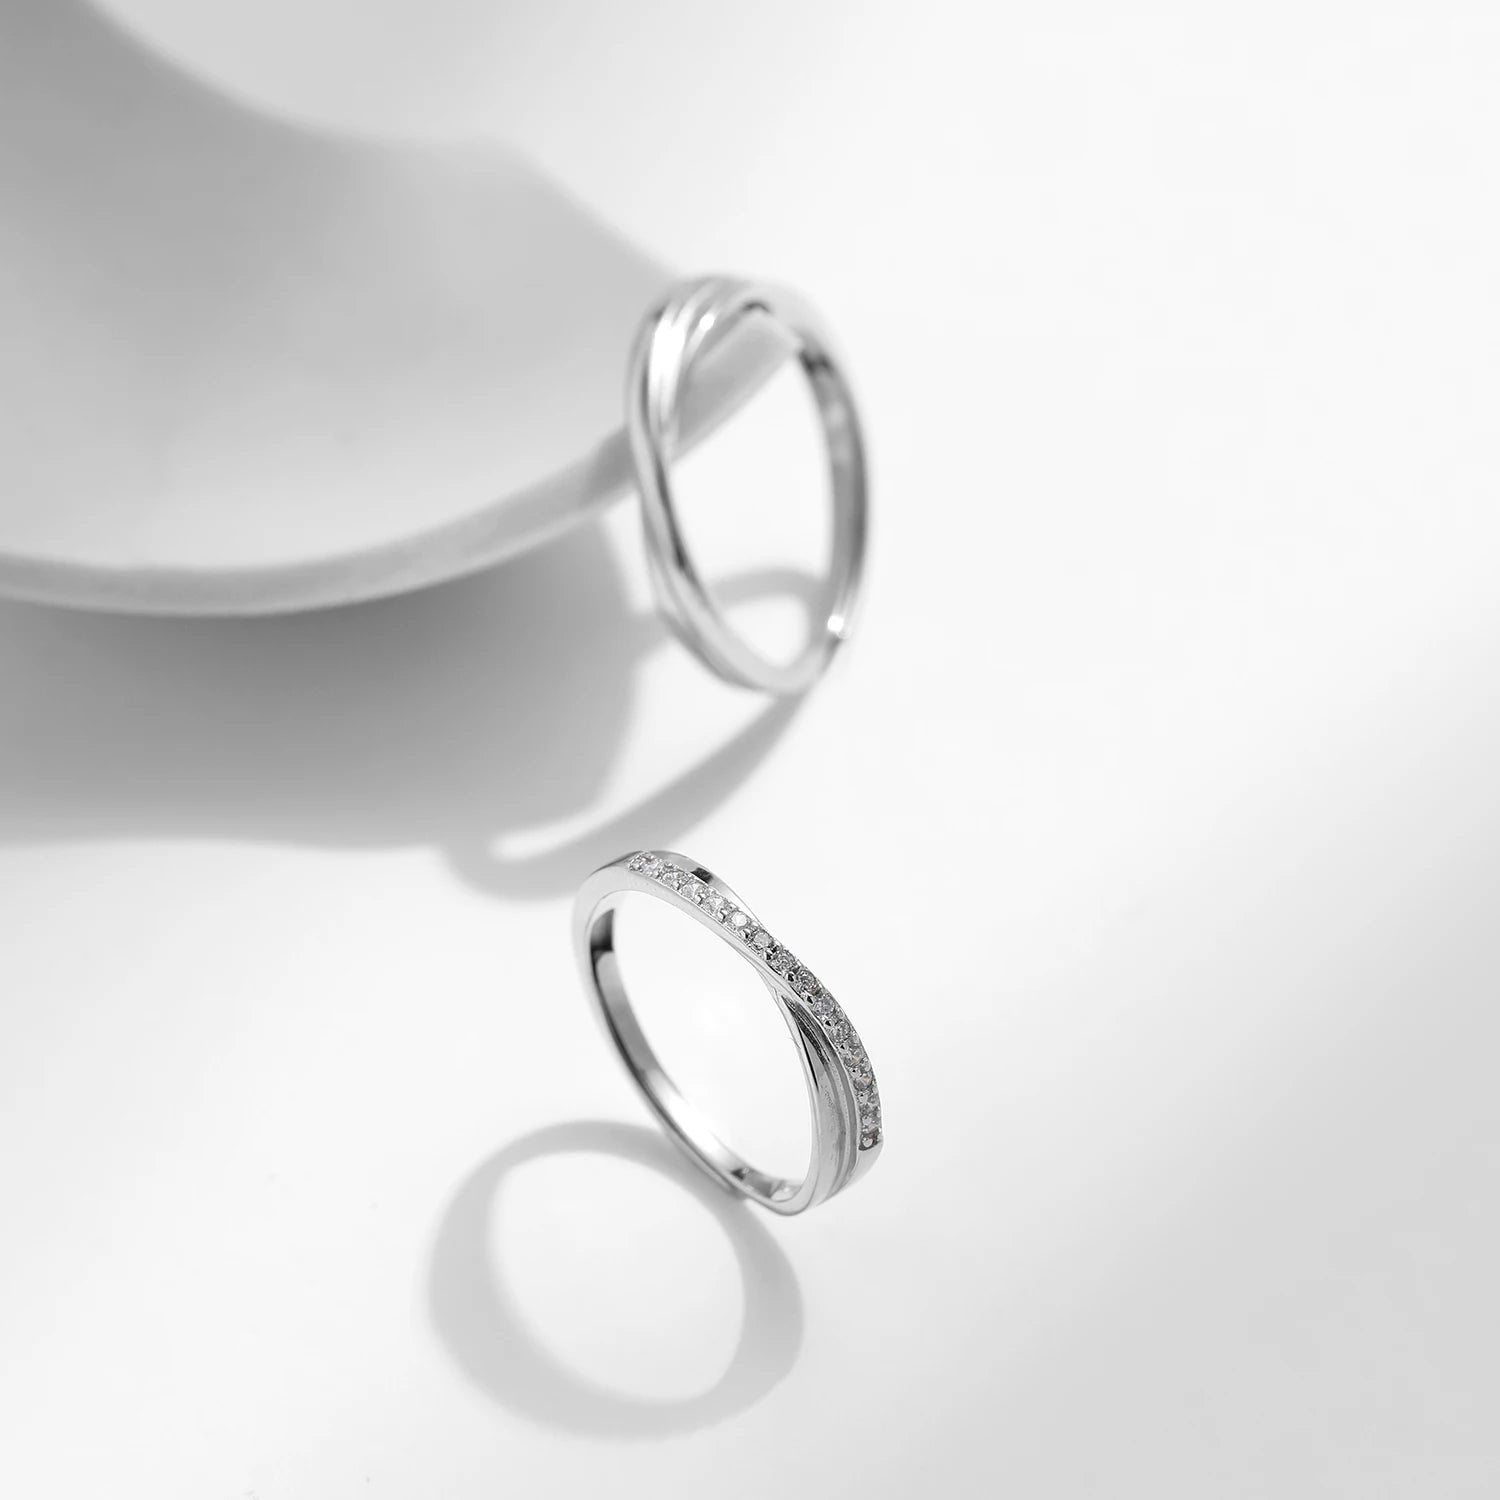 Intertwined Love Adjustable Couples Rings